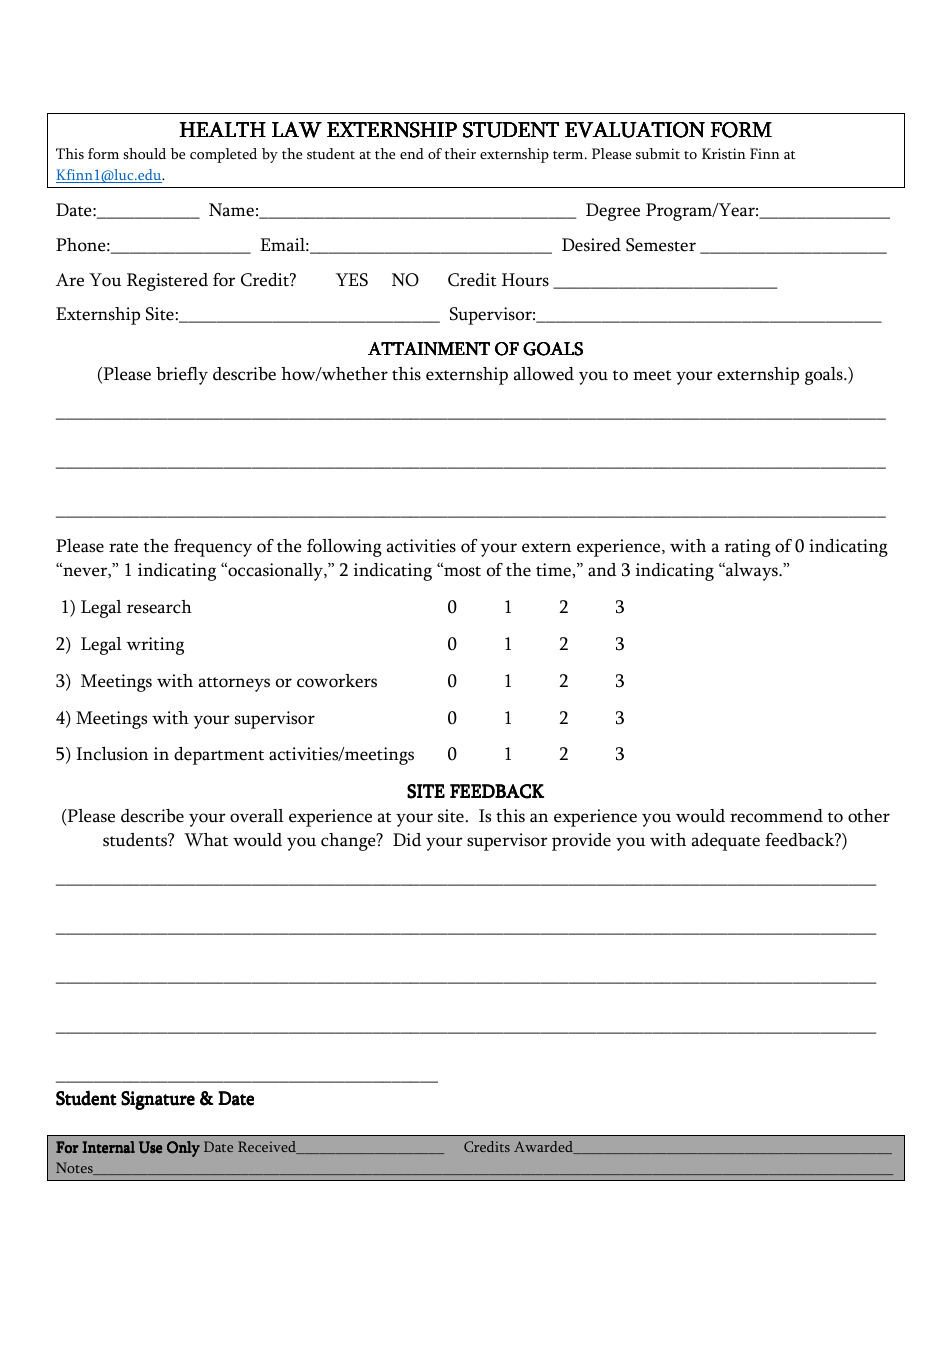 Health Law Externship Student Evaluation Form, Page 1